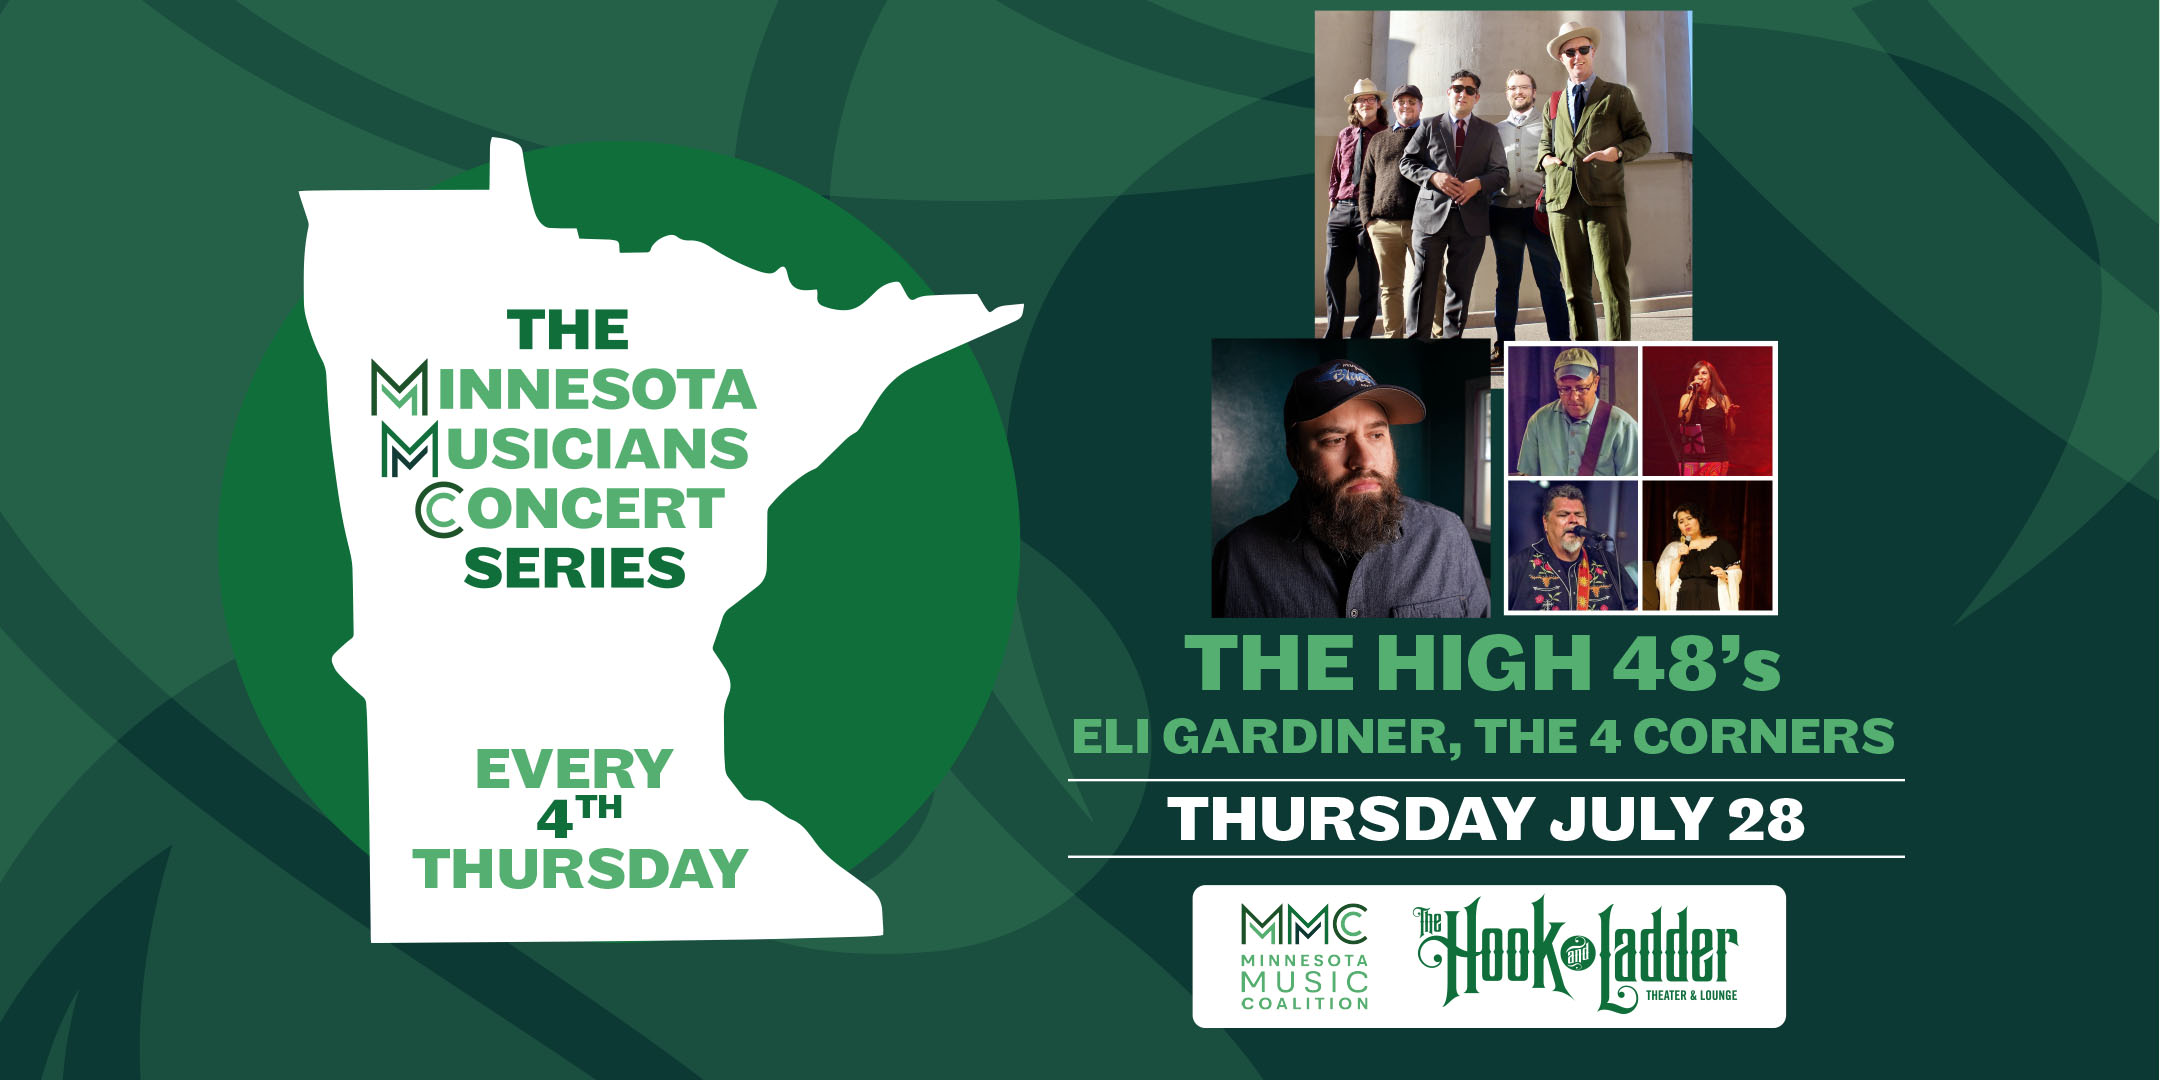 Minnesota Music Coalition & The Hook and Ladder Presents The Minnesota Musicians Concert Series Every 4th Thursday Thursday, July 28 The High 48s, Eli Gardiner, & The 4 Corners The Hook and Ladder Theater Doors 6:30pm :: Music 7:00pm :: 21+ $5 EARLY / $10 ADV / $15 DOS